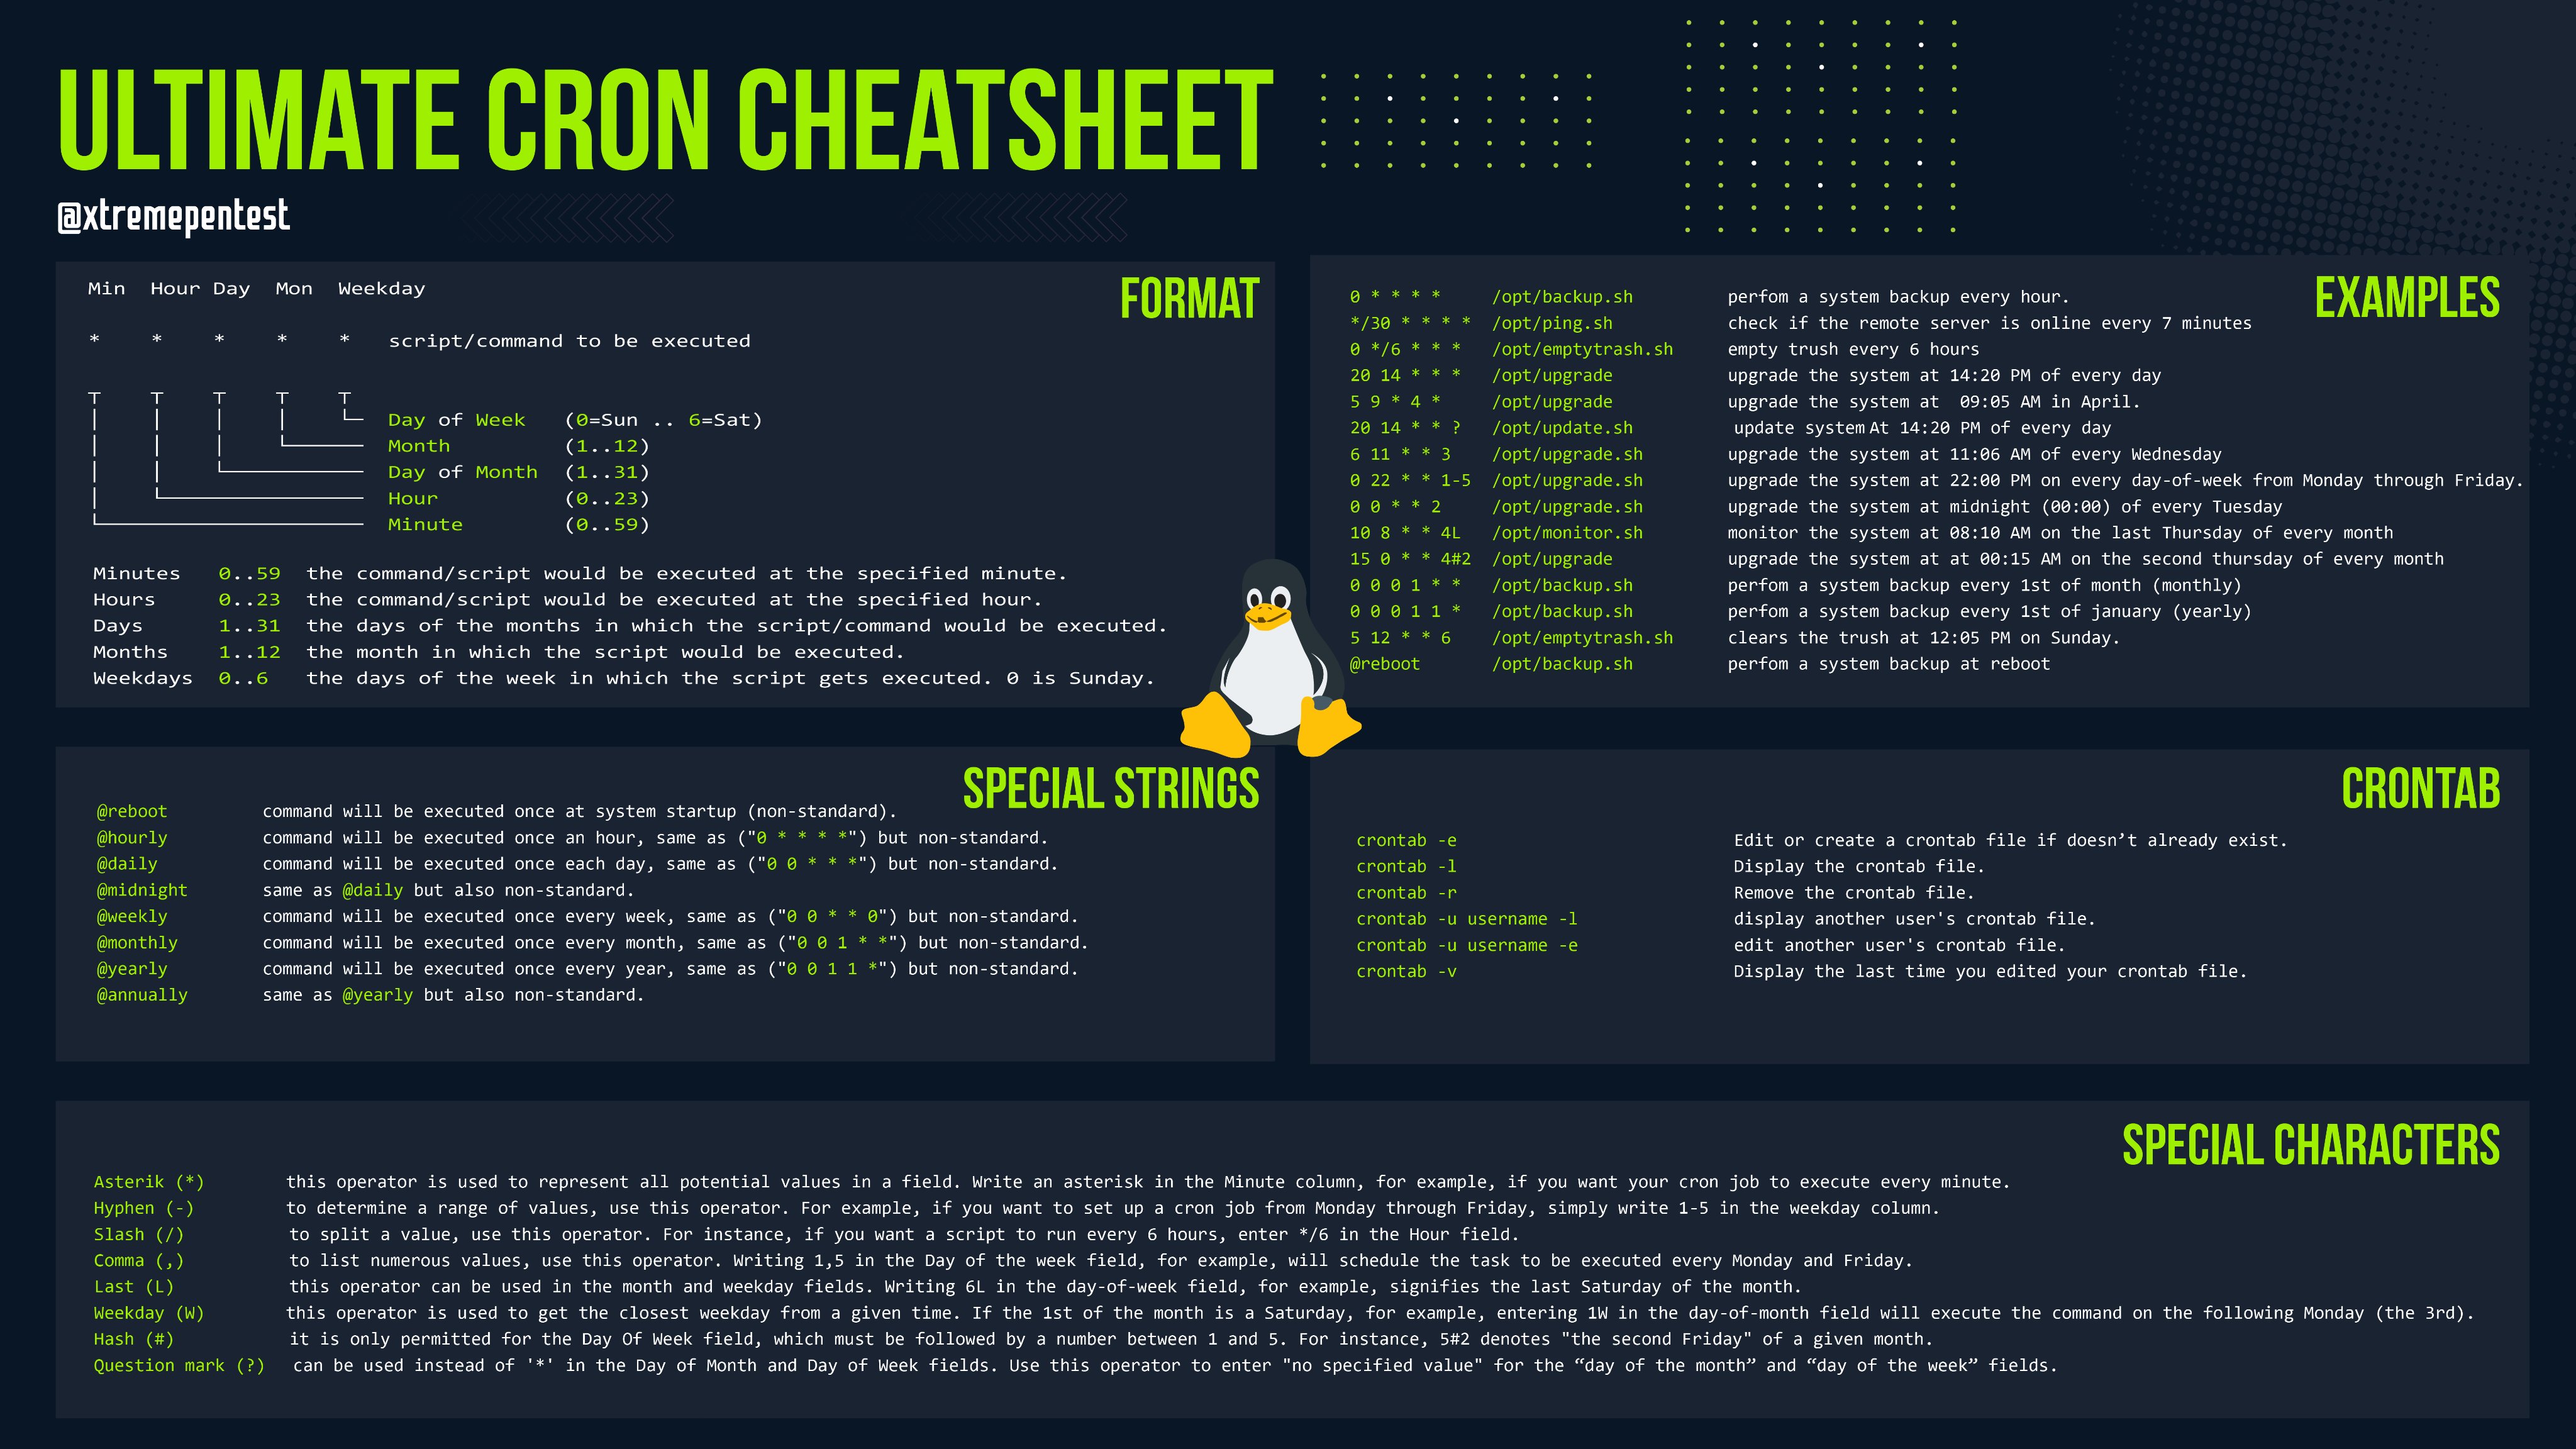 The XSS Rat - Uncle Rat ❤️ on X: #BugBountyTips i created this XSS cheat  sheet for you guys <3  / X